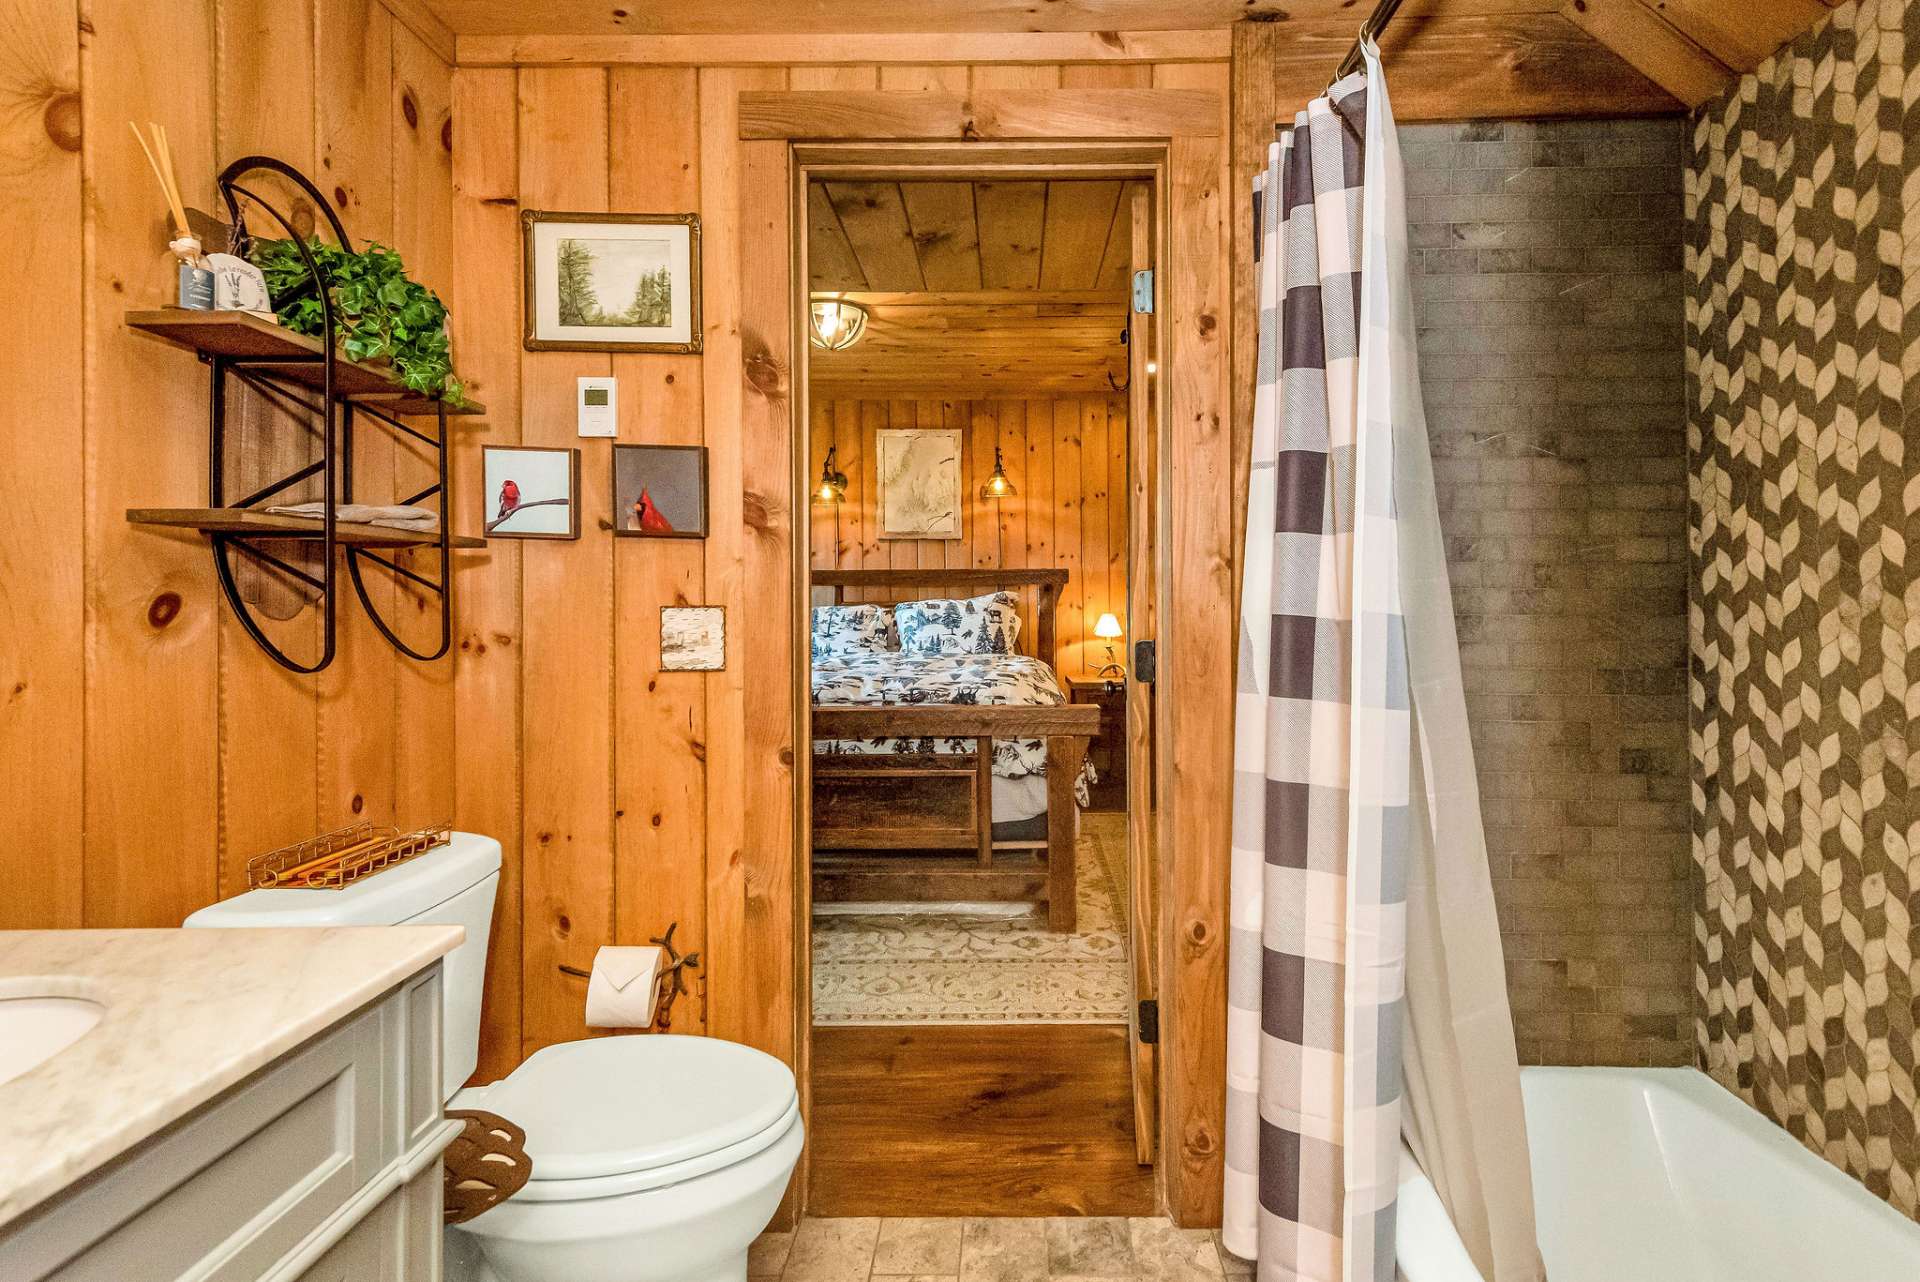 Each of the 3 baths offers exquisite tile work and maximizes the rustic charm of this home.